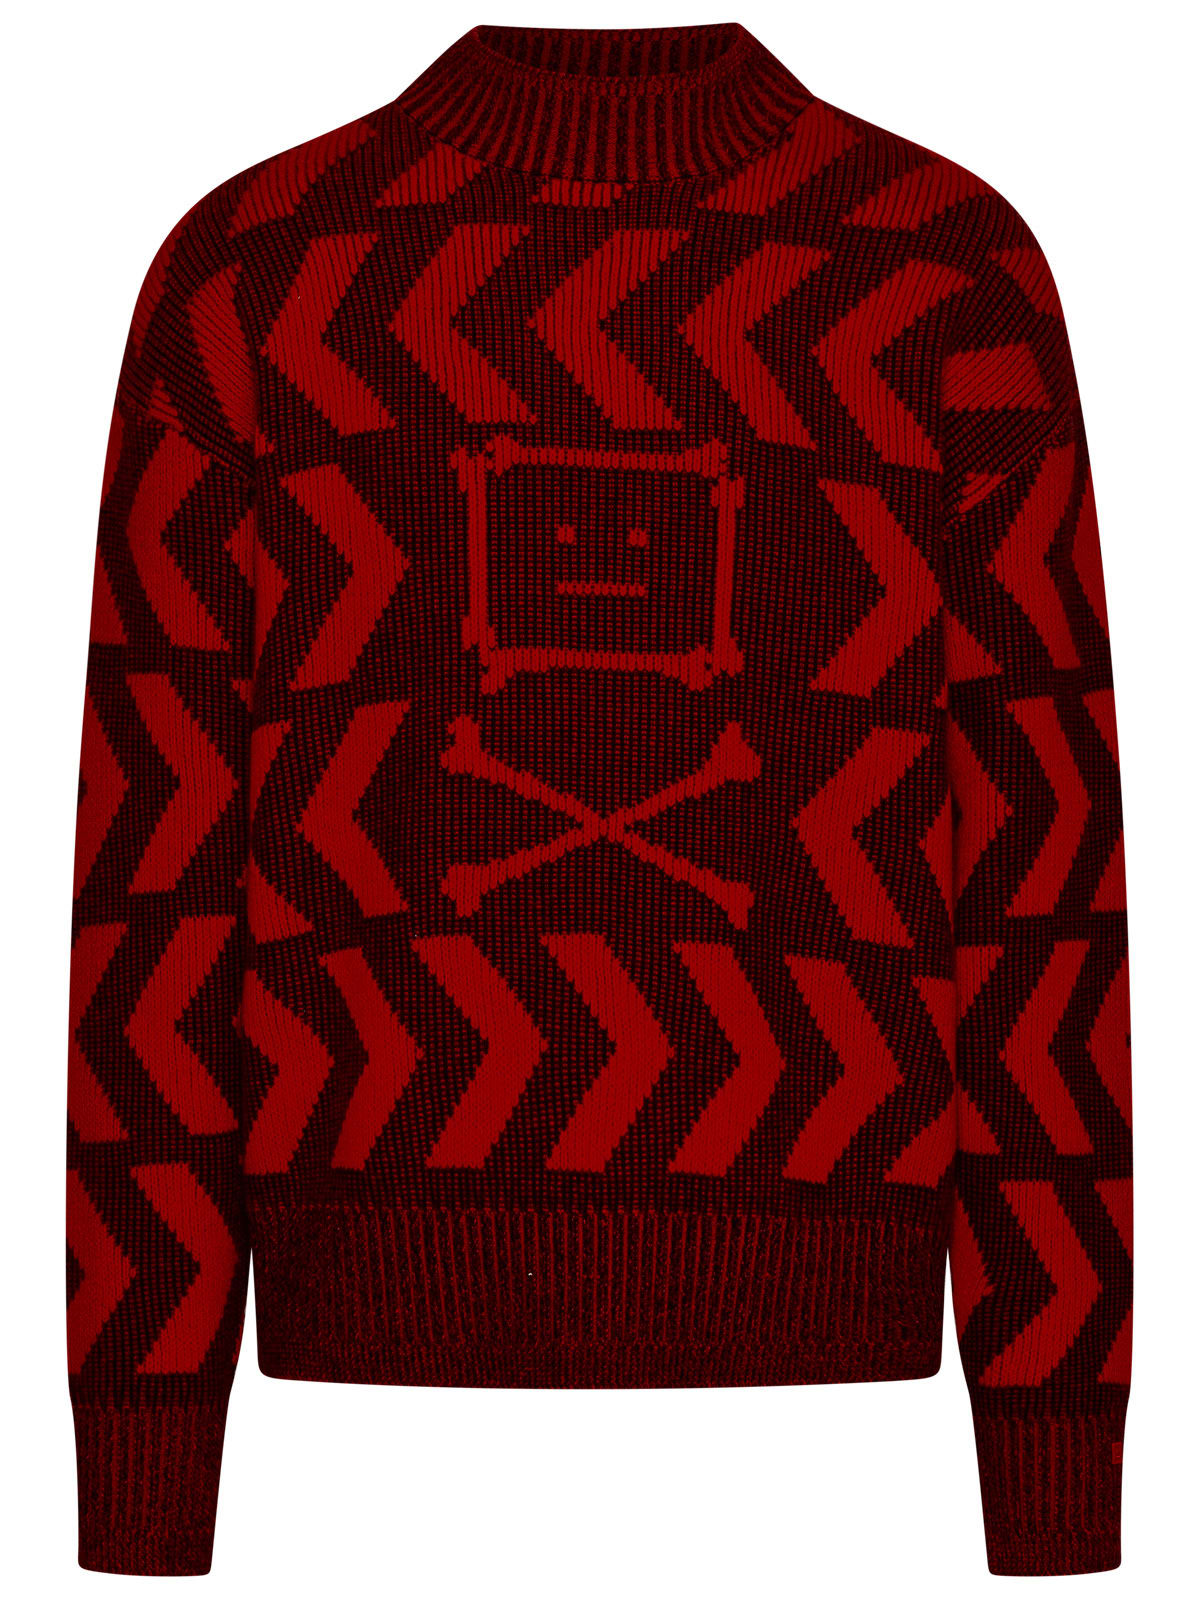 ACNE STUDIOS RED WOOL BLEND SWEATER